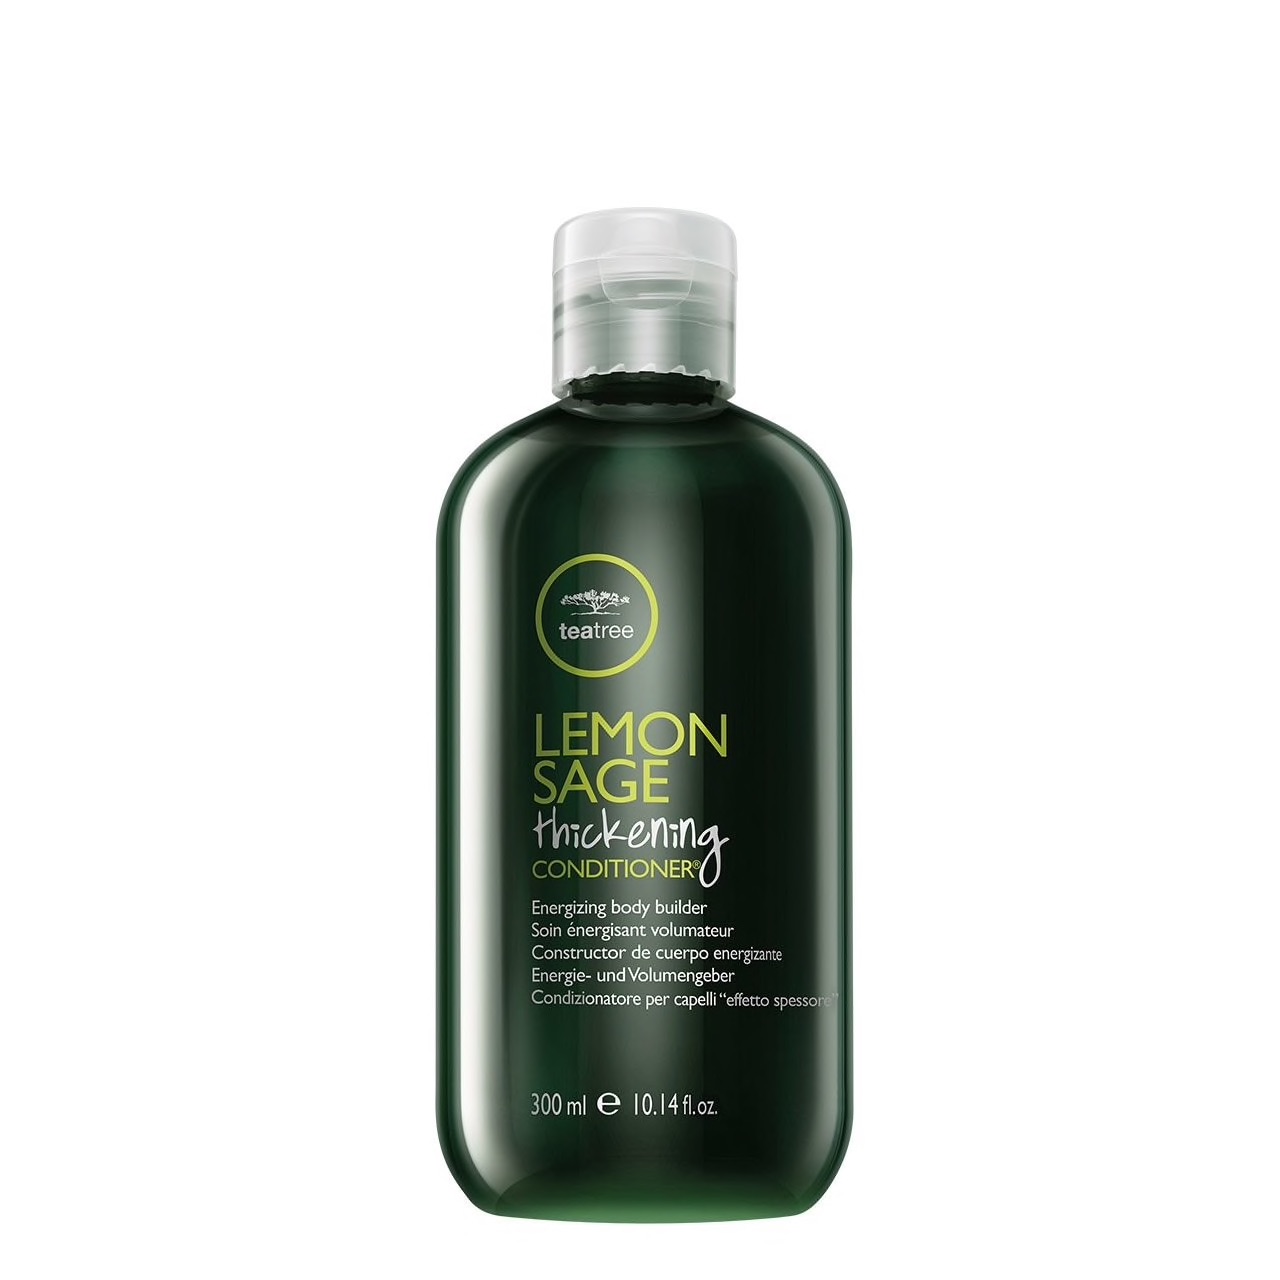 Lemon Sage Conditioner by Paul Mitchell